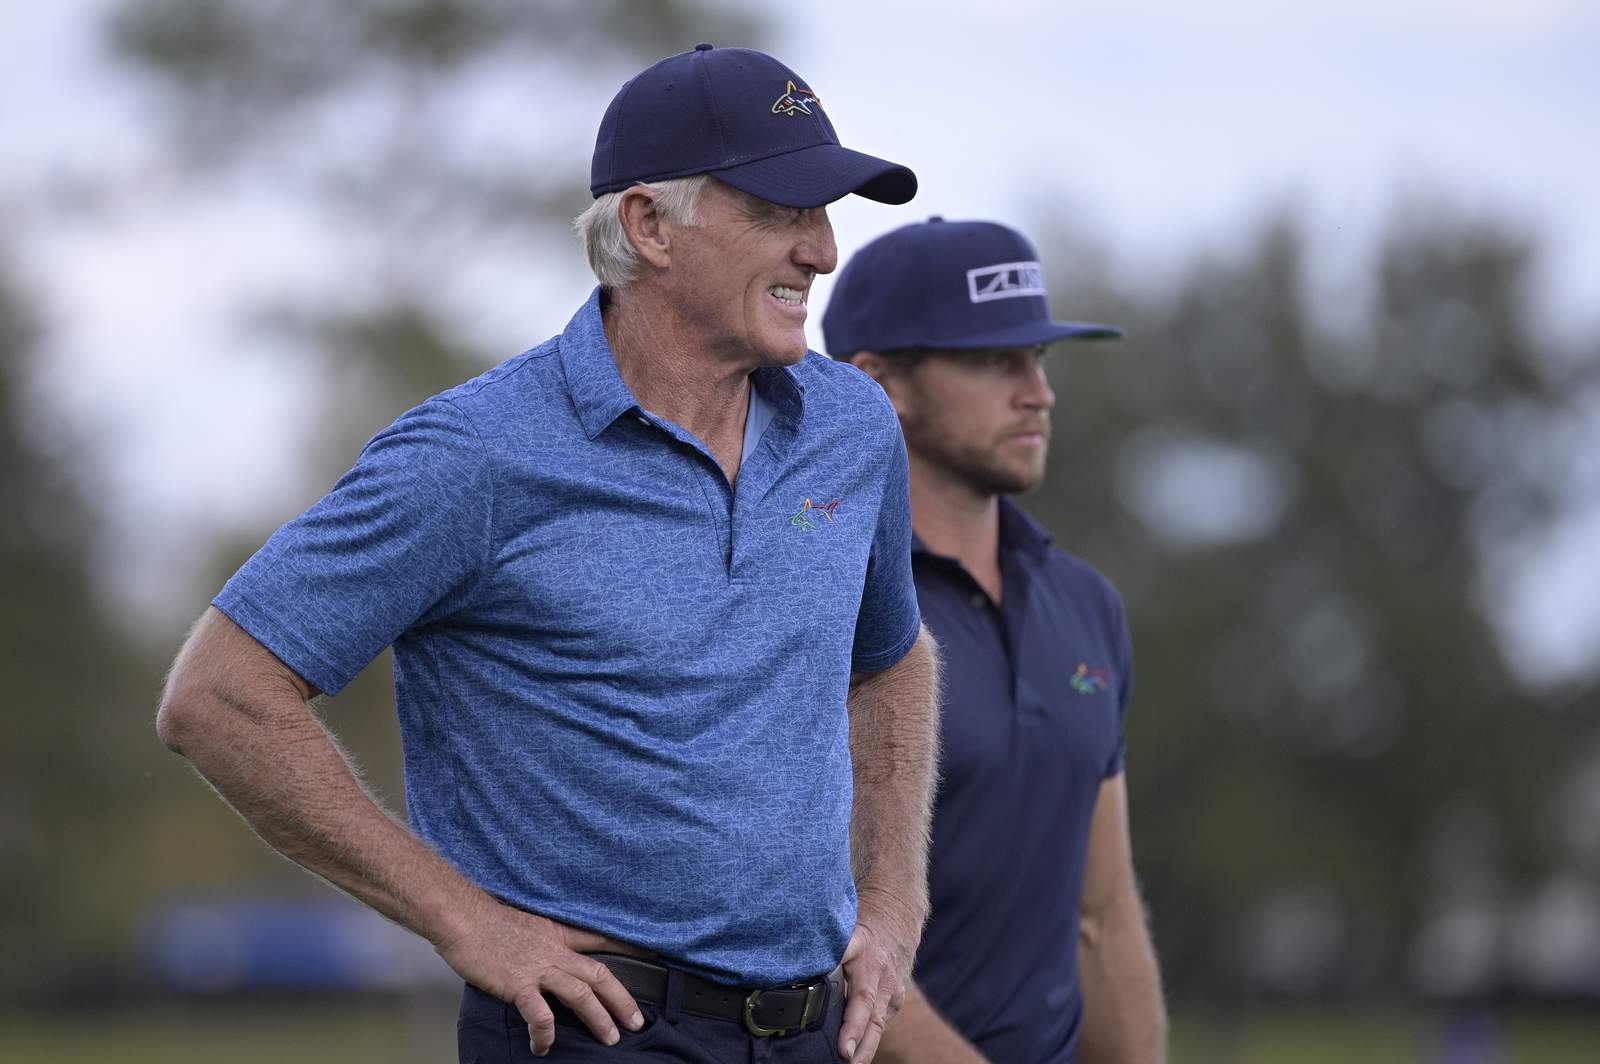 The Latest: Greg Norman in hospital after father-son tourney